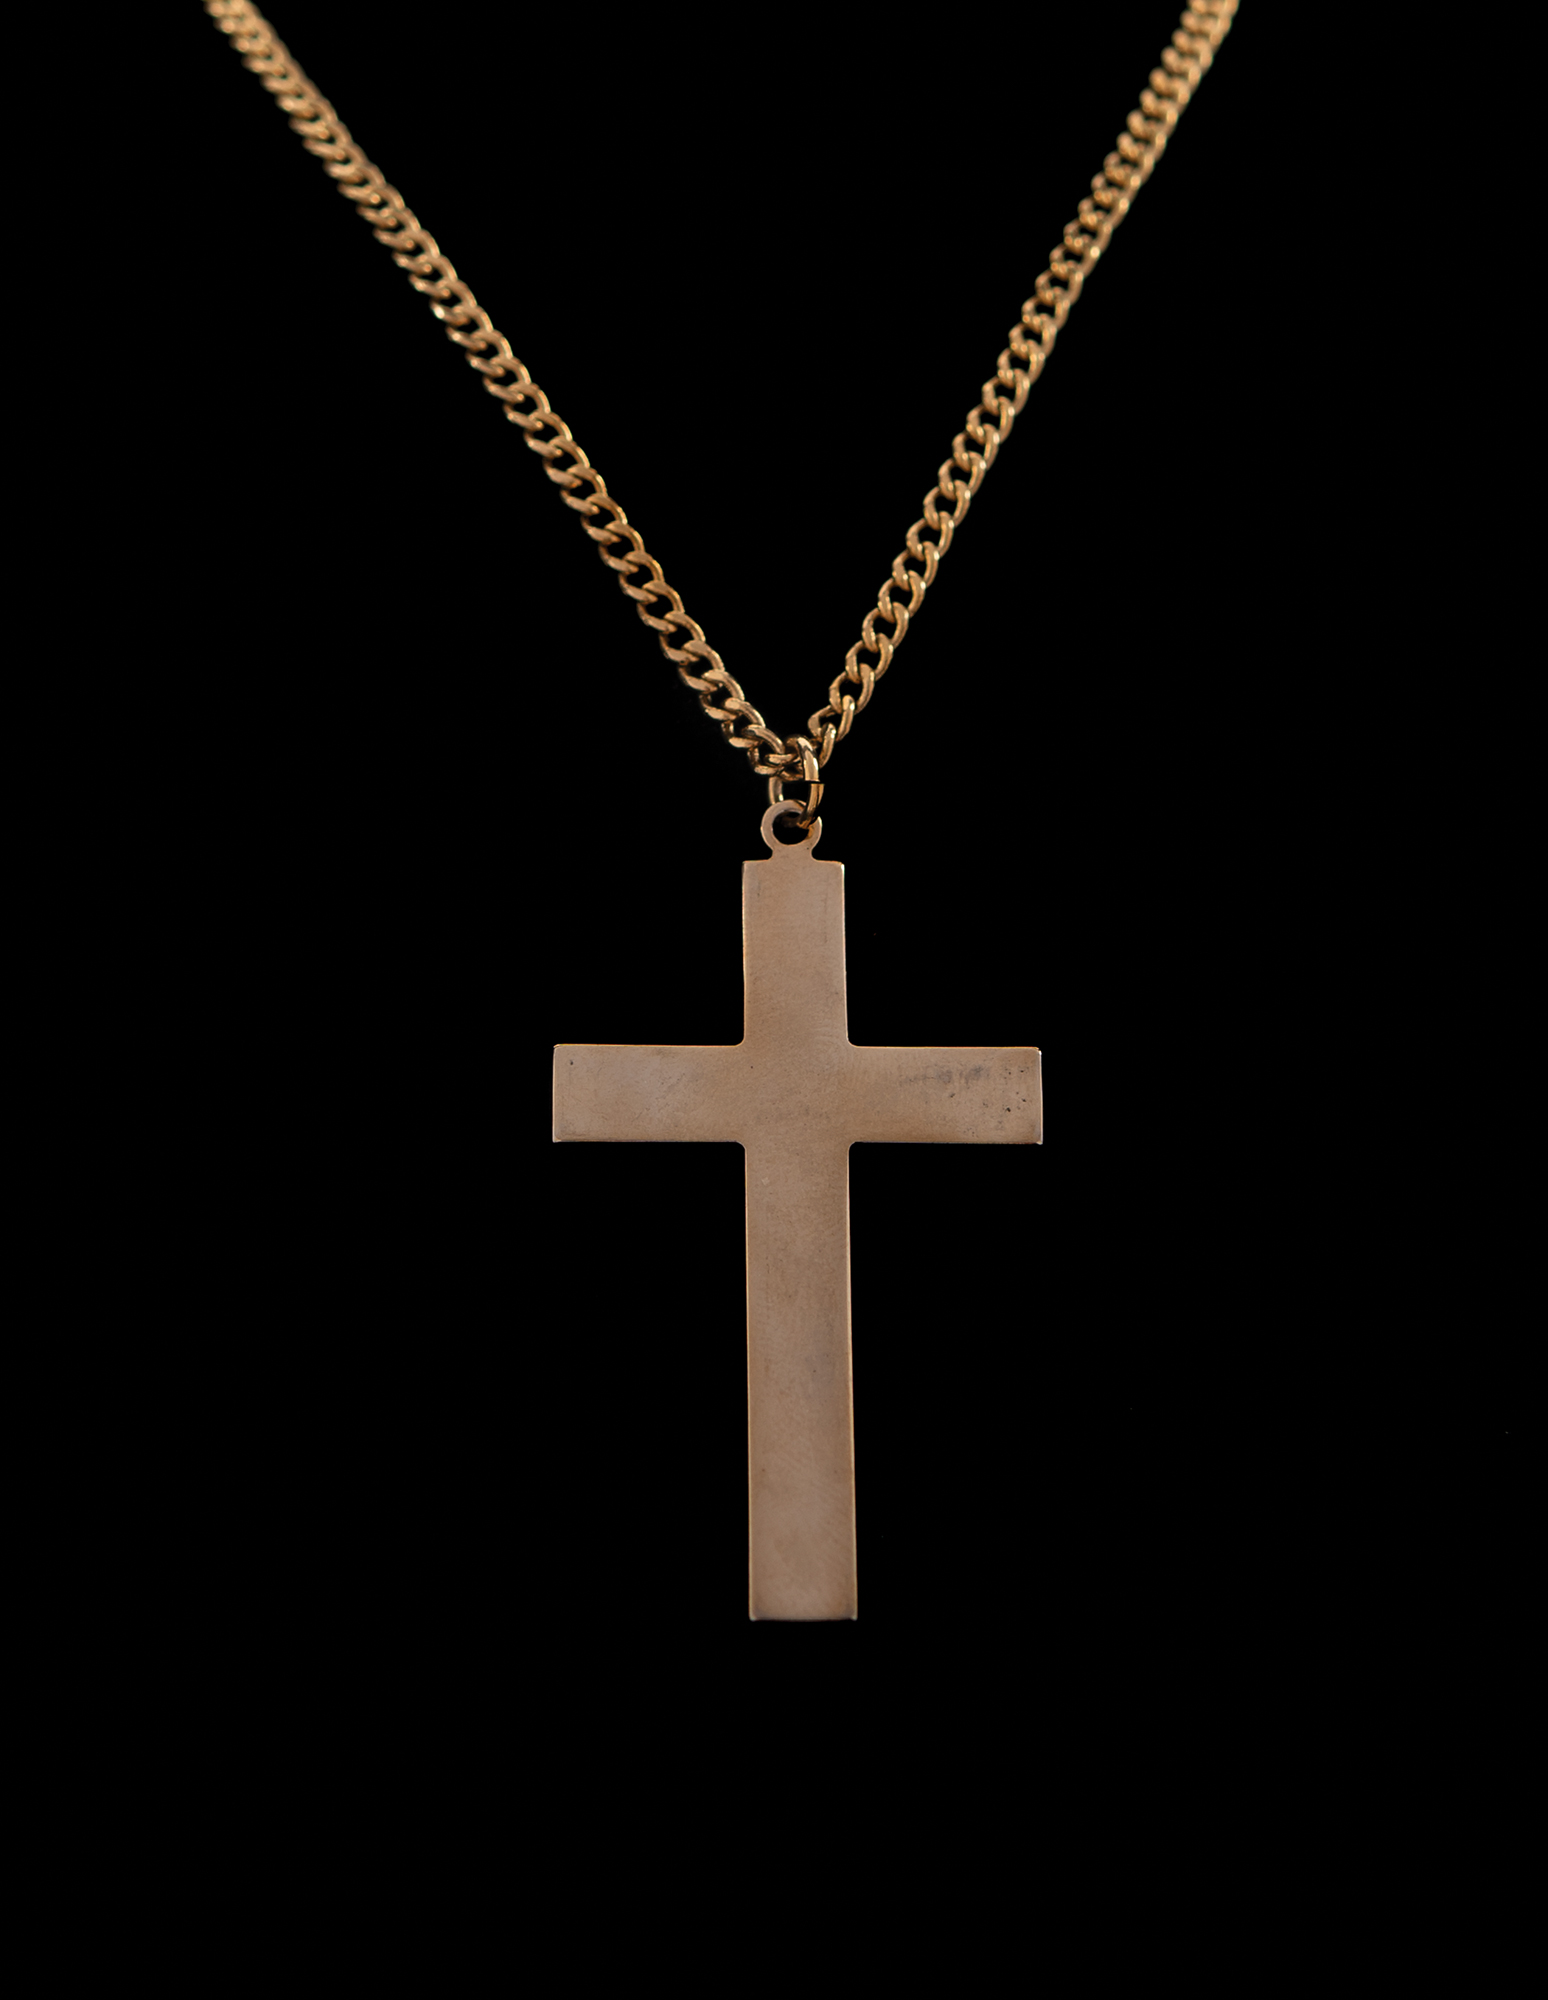 Prince's Personally-Owned and -Worn Cross and Chain | RR Auction